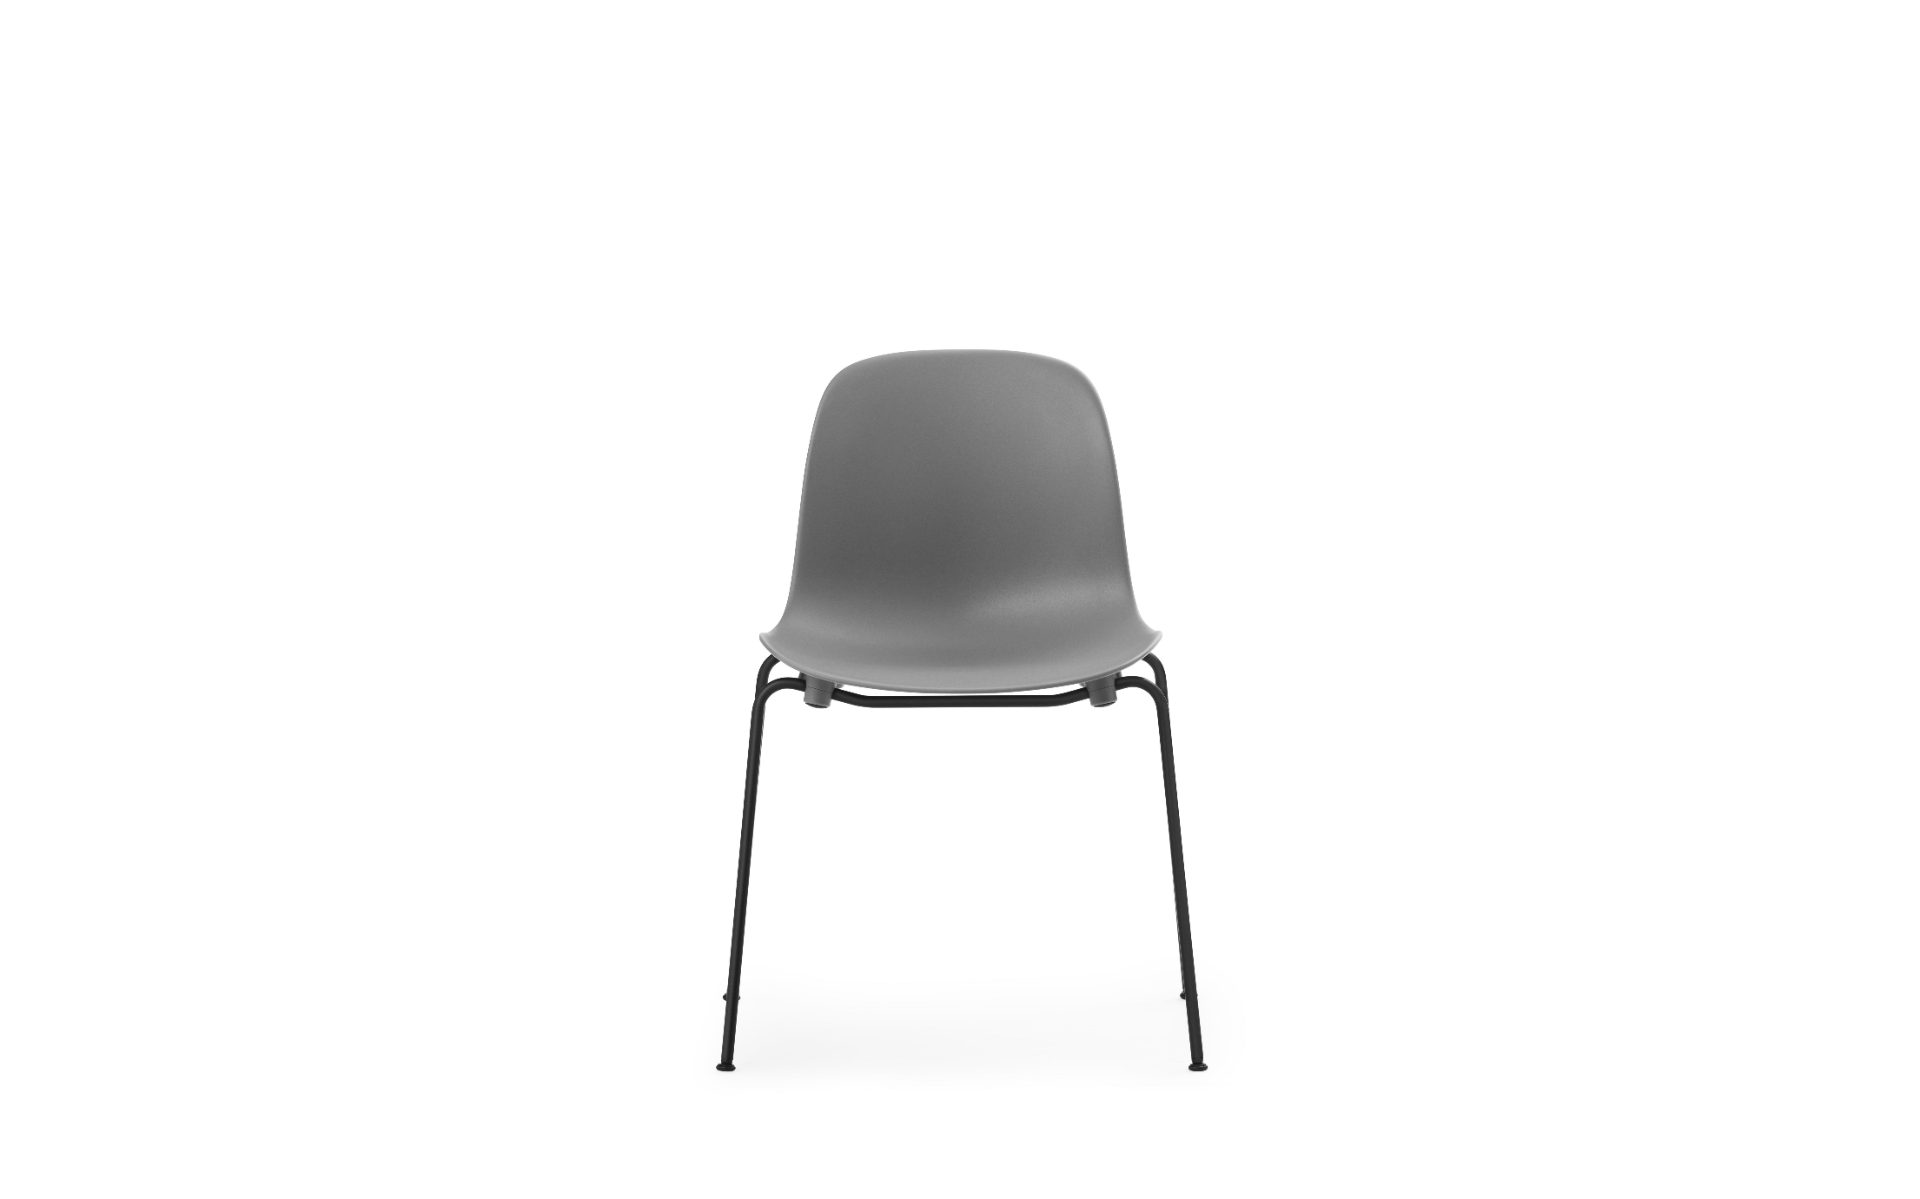 https://www.fundesign.nl/media/catalog/product/f/o/form_chair_stacking_black_steel2_3_.png